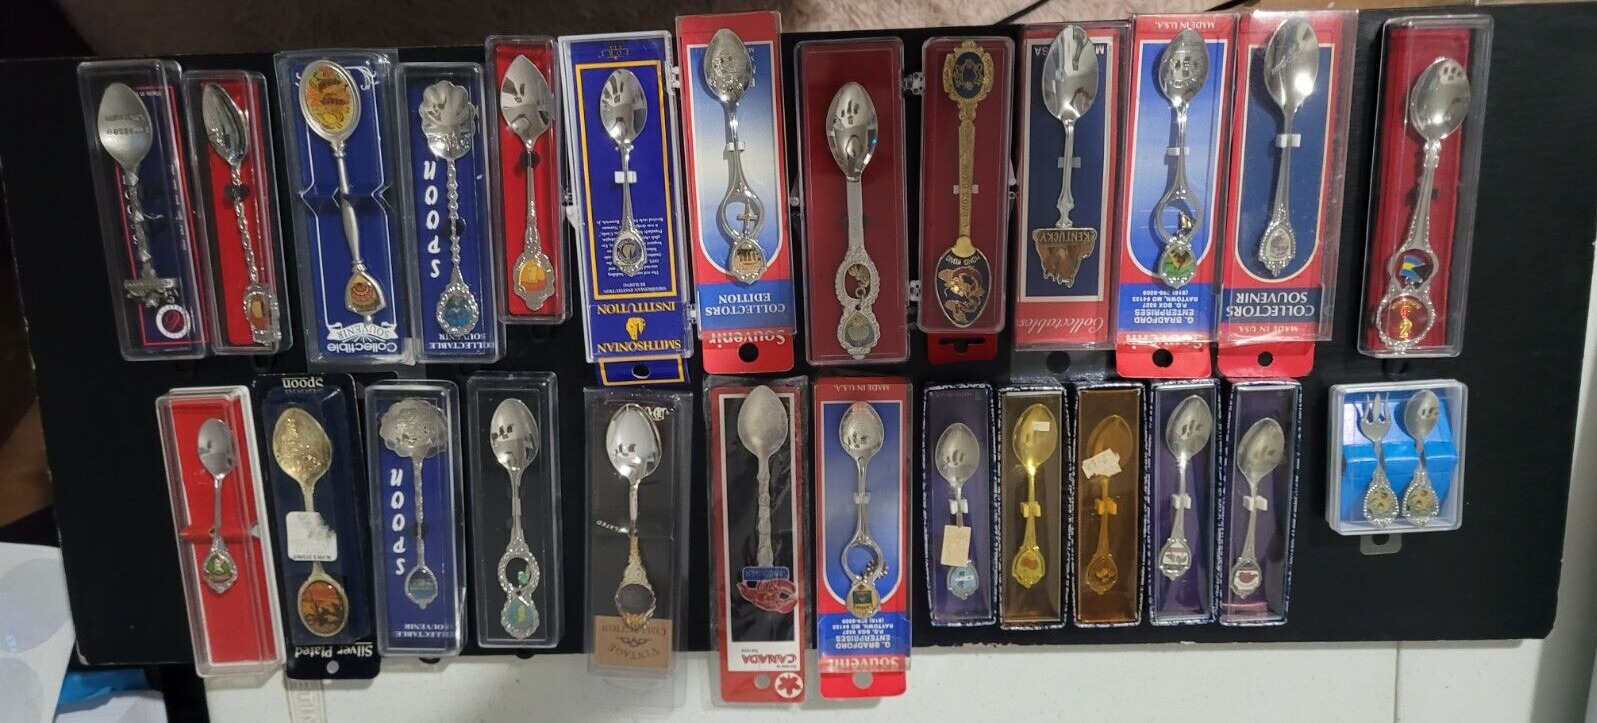 VTG/HUGE LOT OF 25 SOUVENIR COLLECTOR SPOONS STATES & COUNTRIES Original Cases